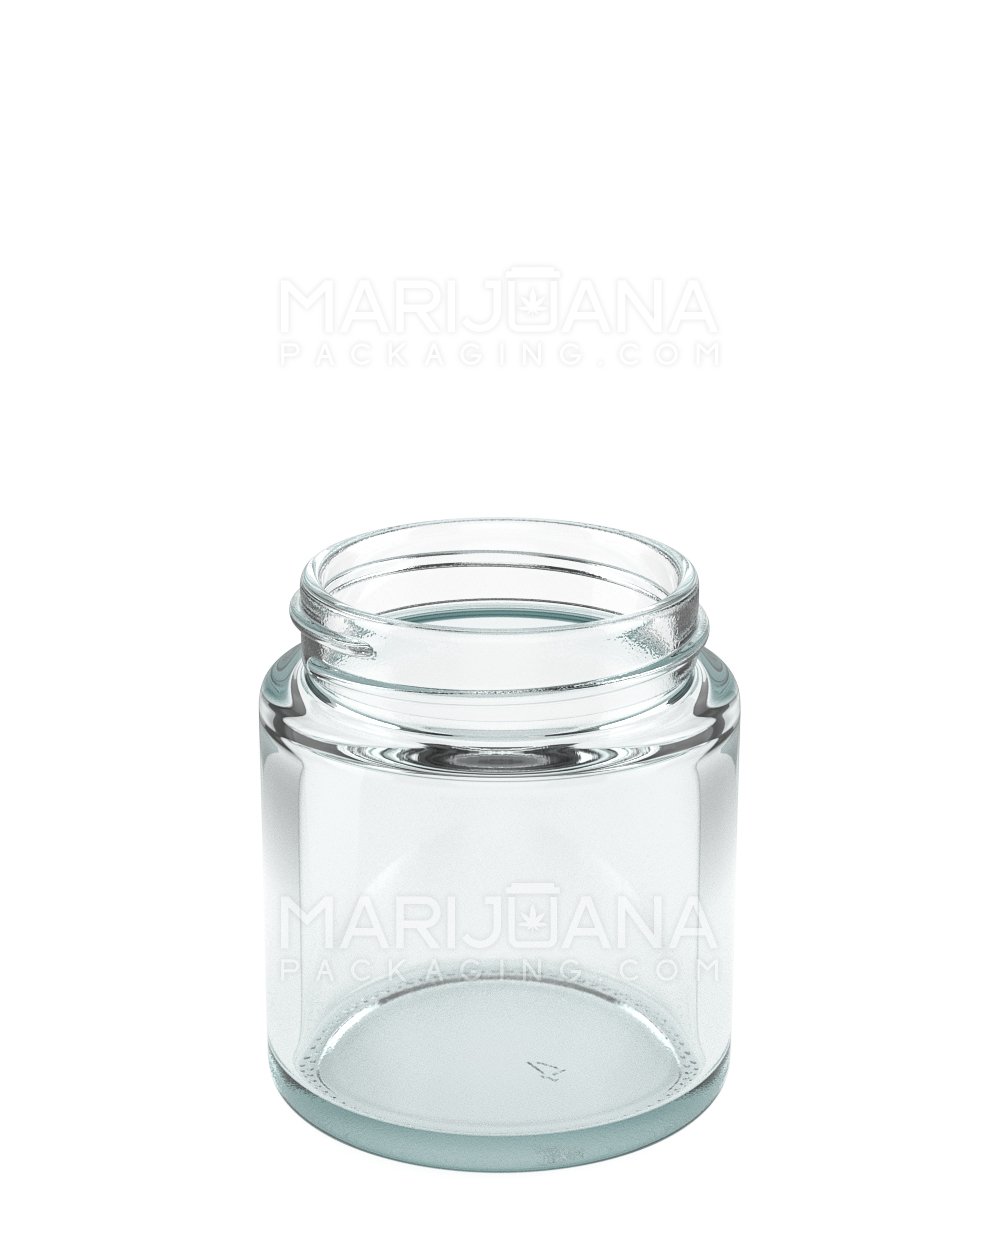 Child Resistant | Straight Sided Clear Glass Jars with Black Cap | 53mm - 3oz - 150 Count - 3